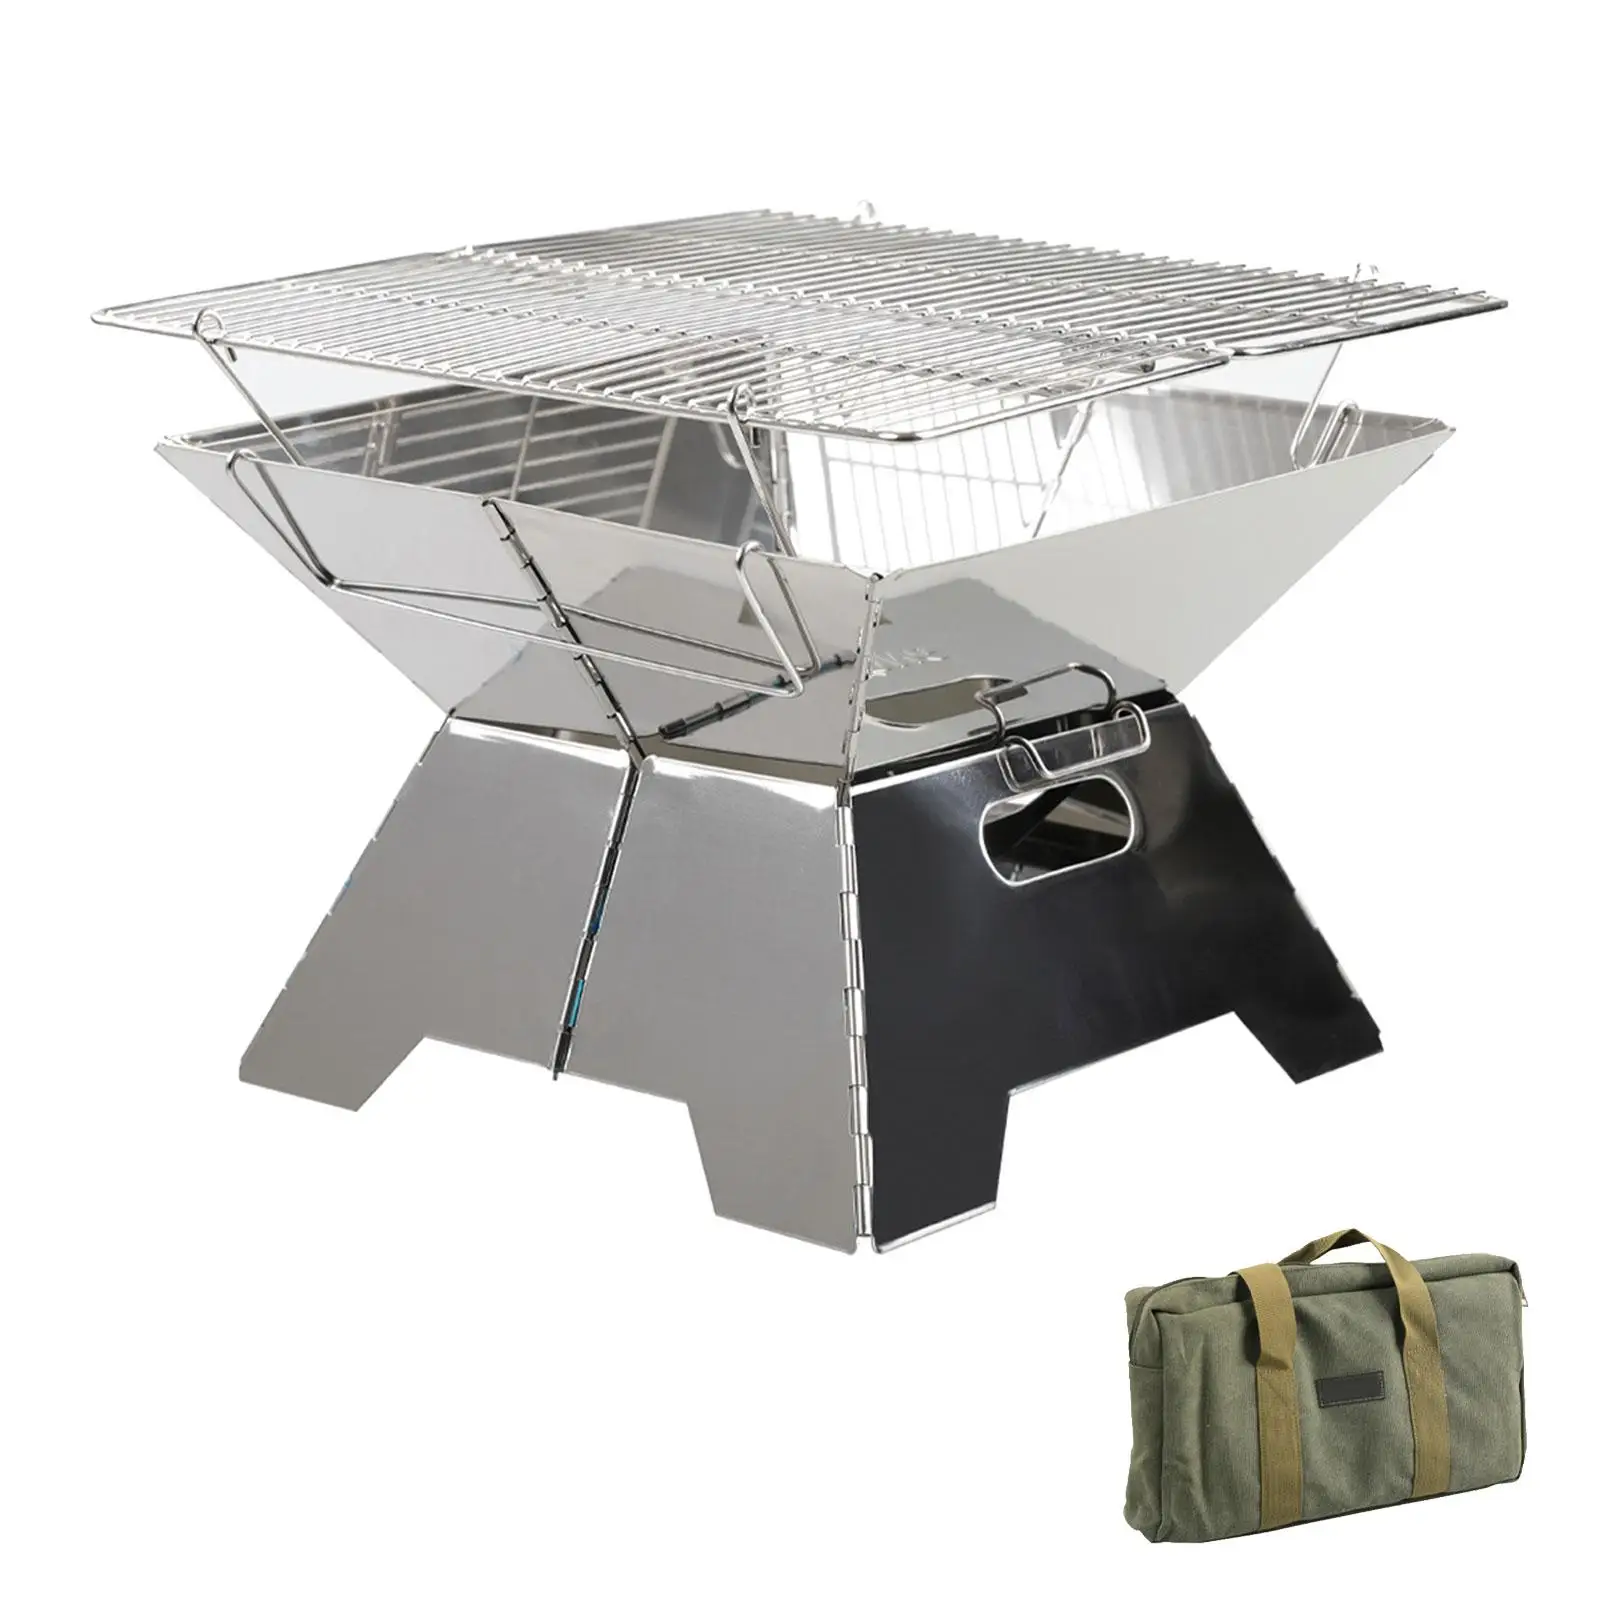 Barbecue Grill Stove Campfire Rack Stainless Steel Campfire Stand Compact Garden Stove for Picnic Traveling Outdoor Camping